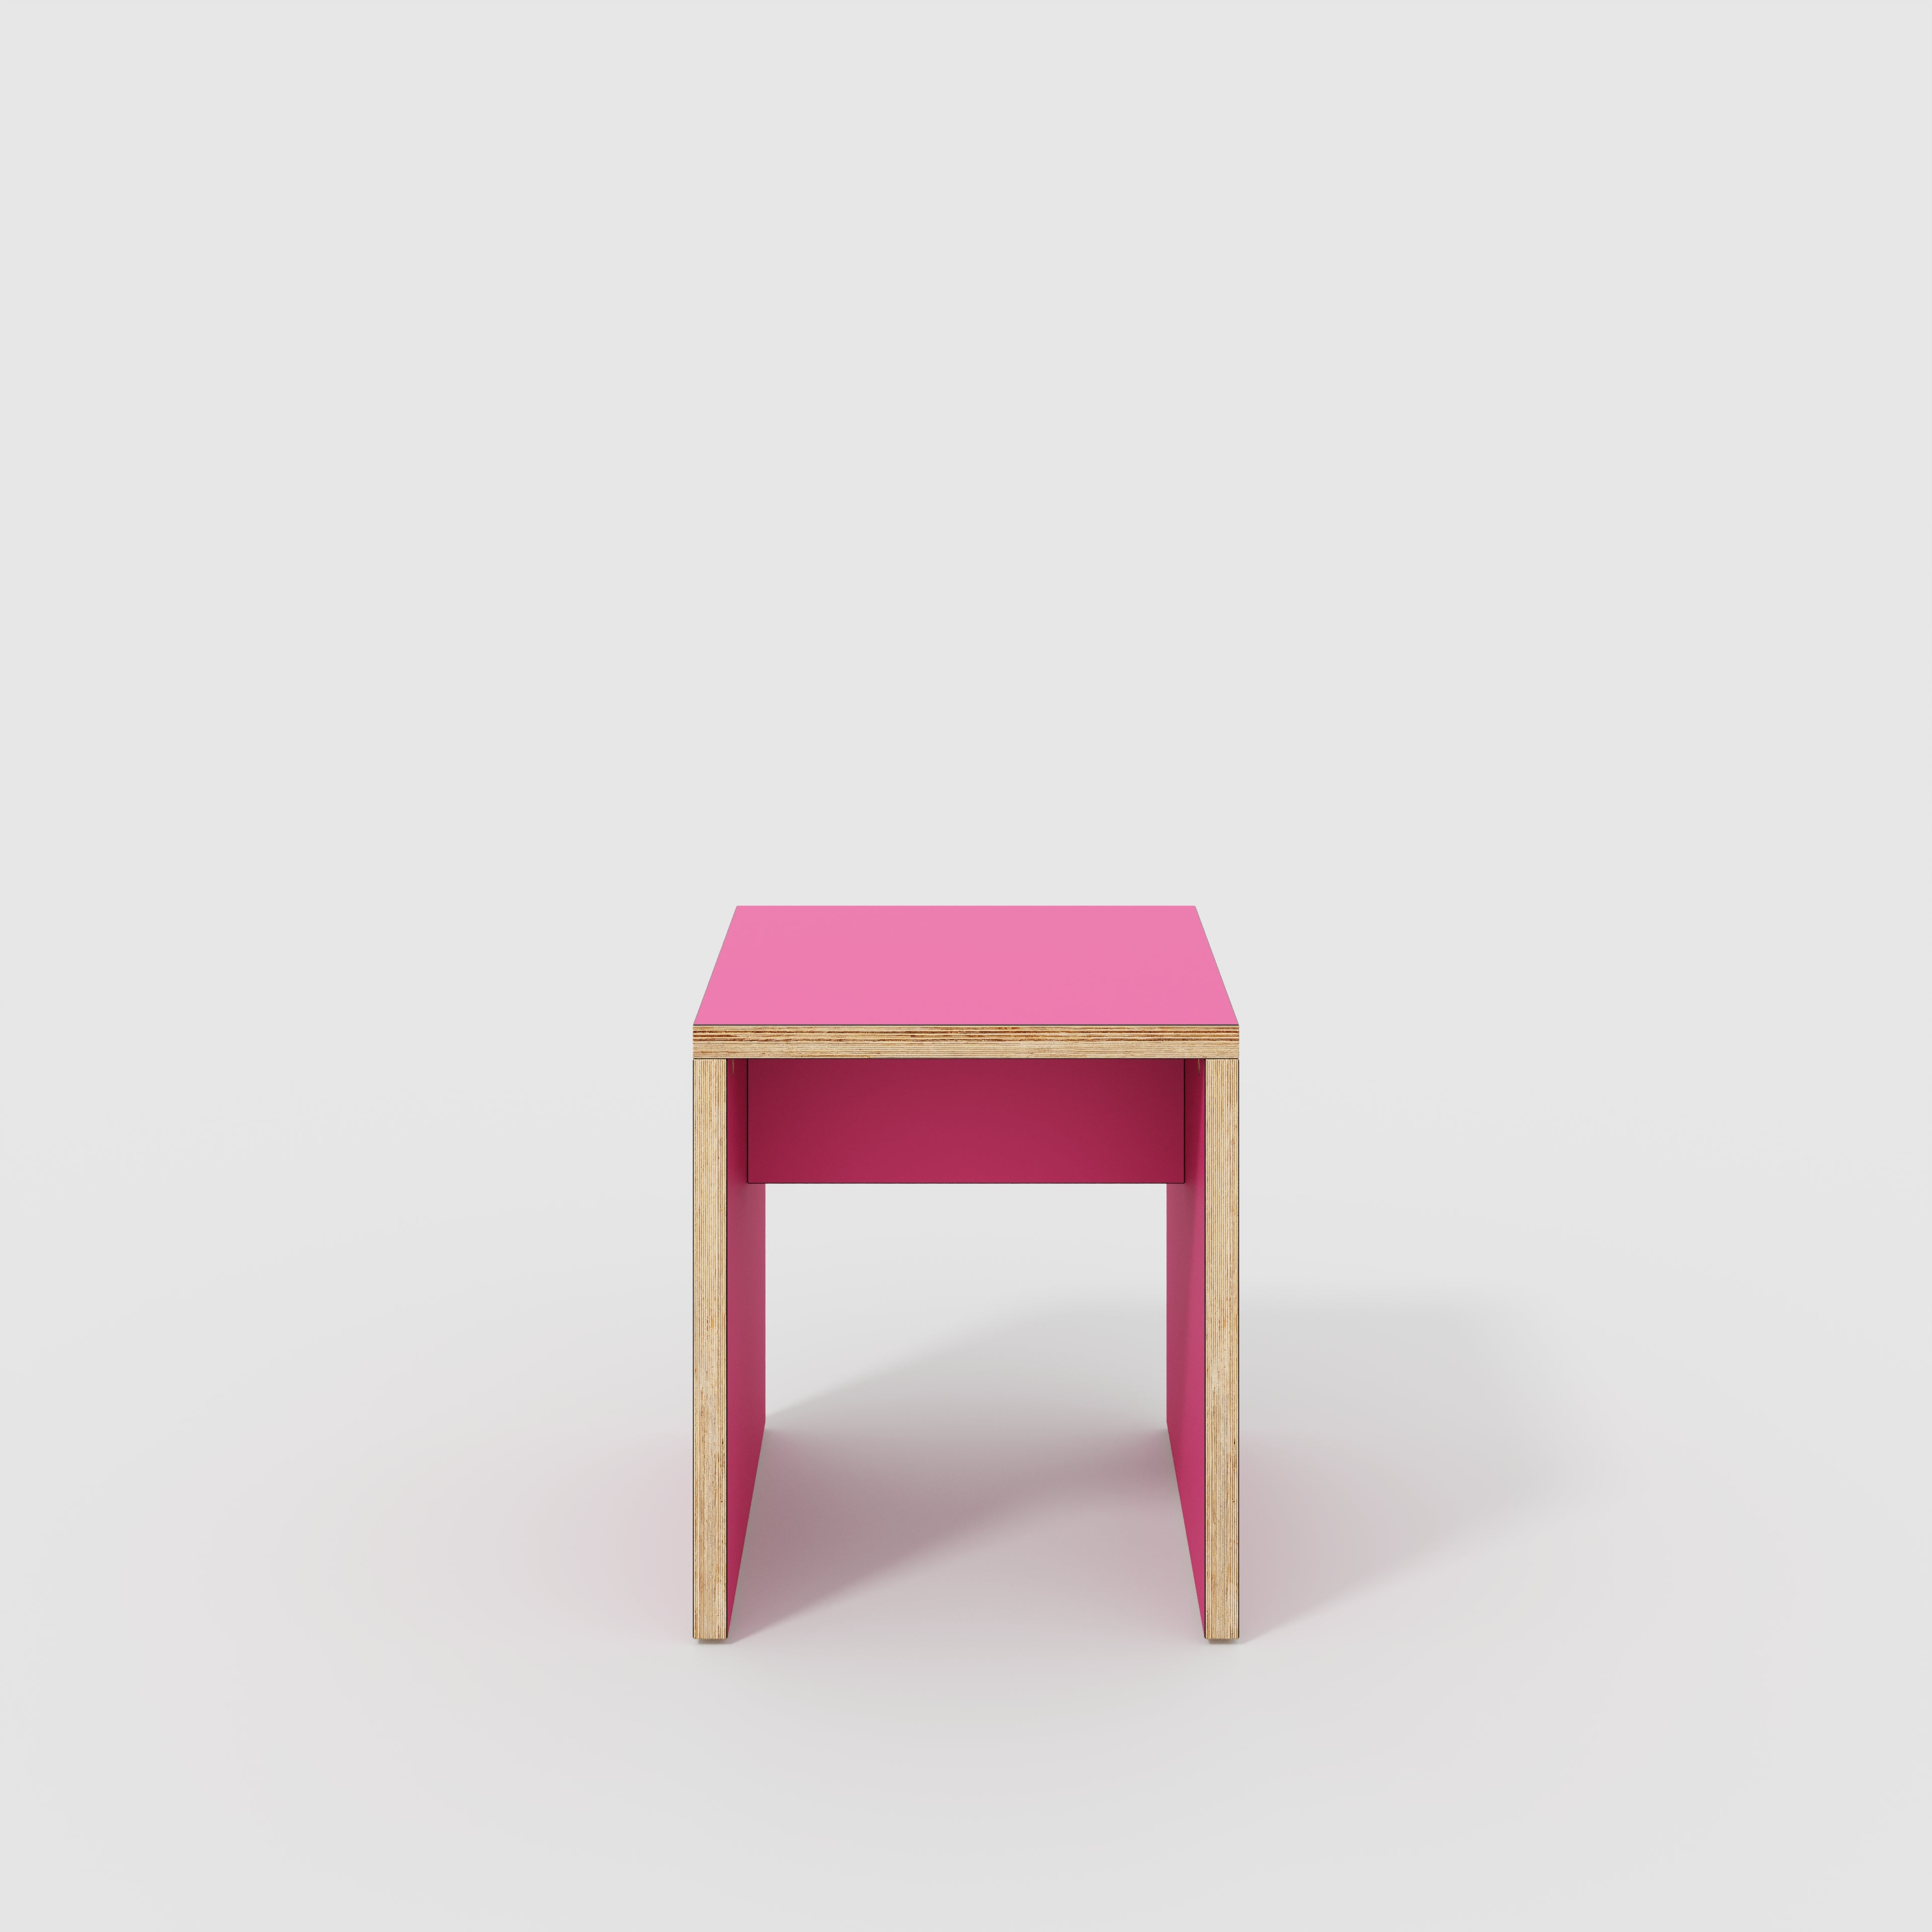 Stool with Solid Sides - Formica Juicy Pink - 400(w) x 400(d) x 450(h)